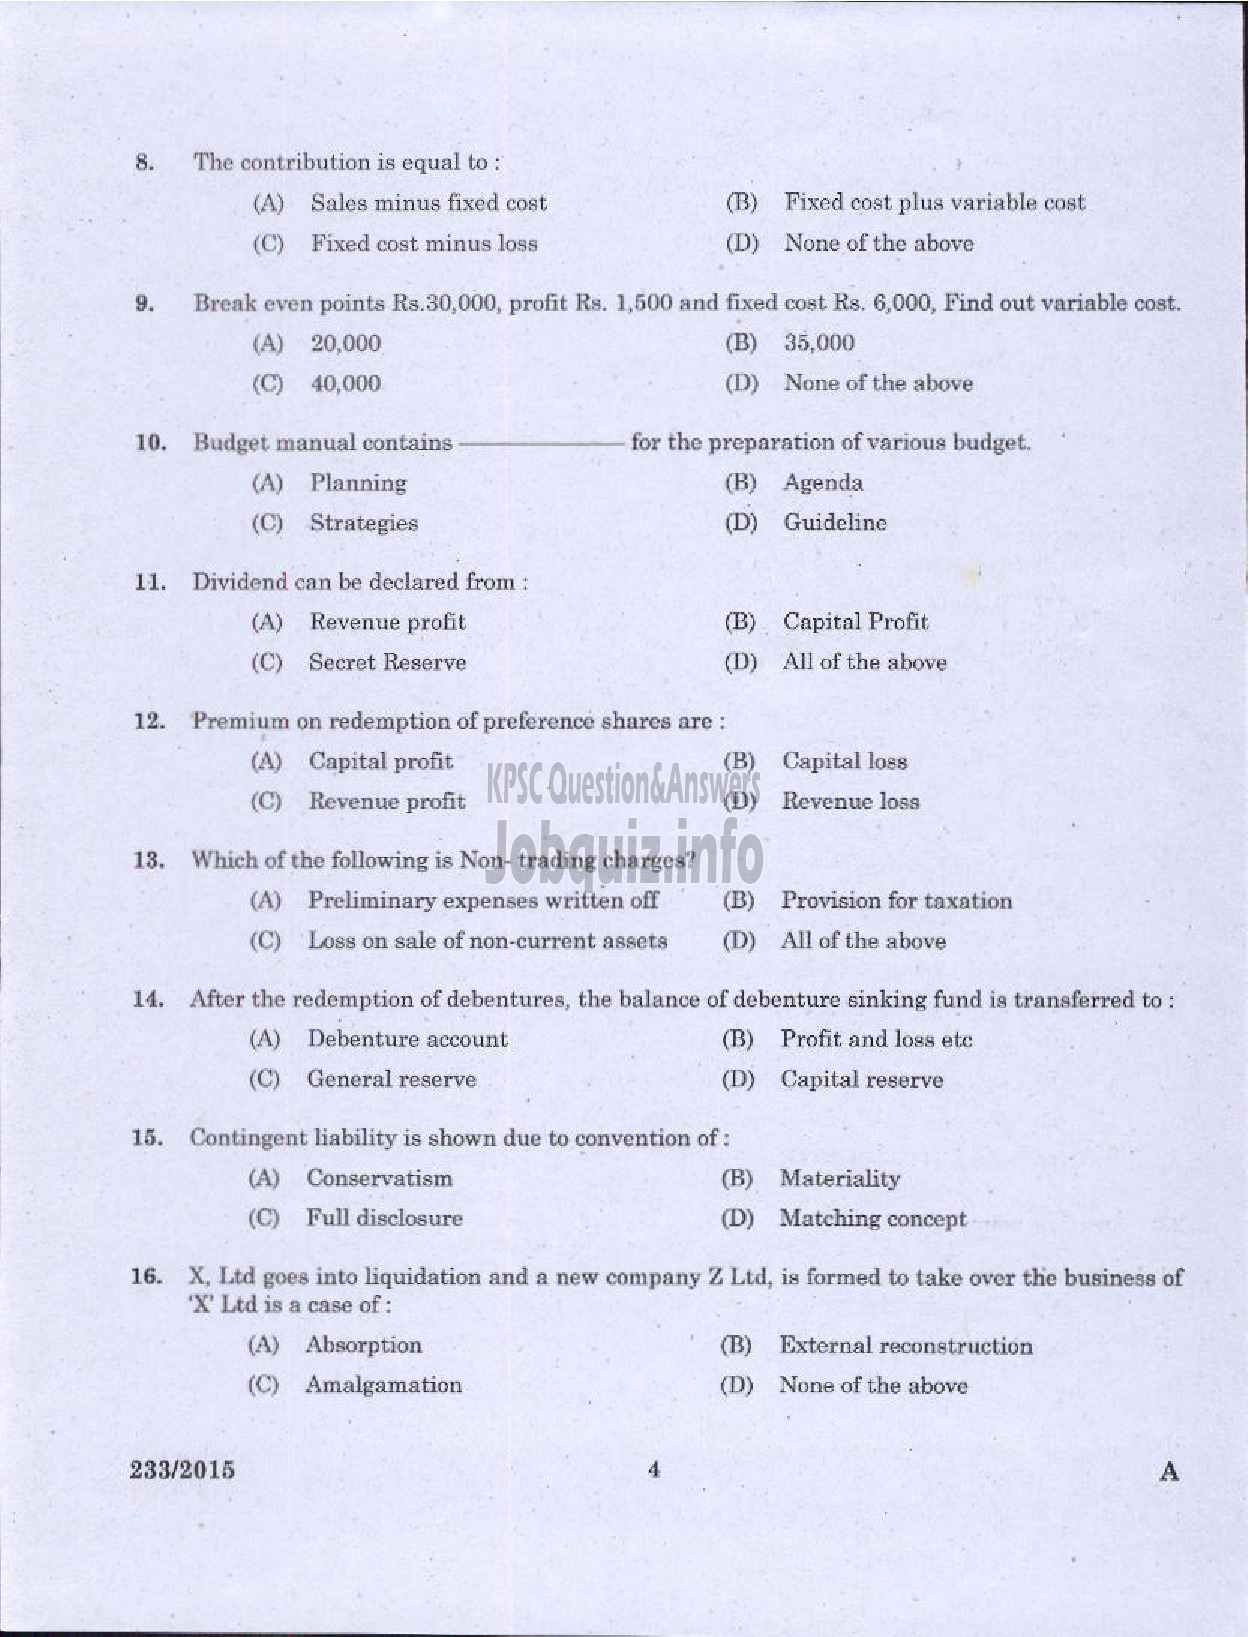 Kerala PSC Question Paper - LECTURER IN COMMERCE TECHNICAL EDUCATION-2